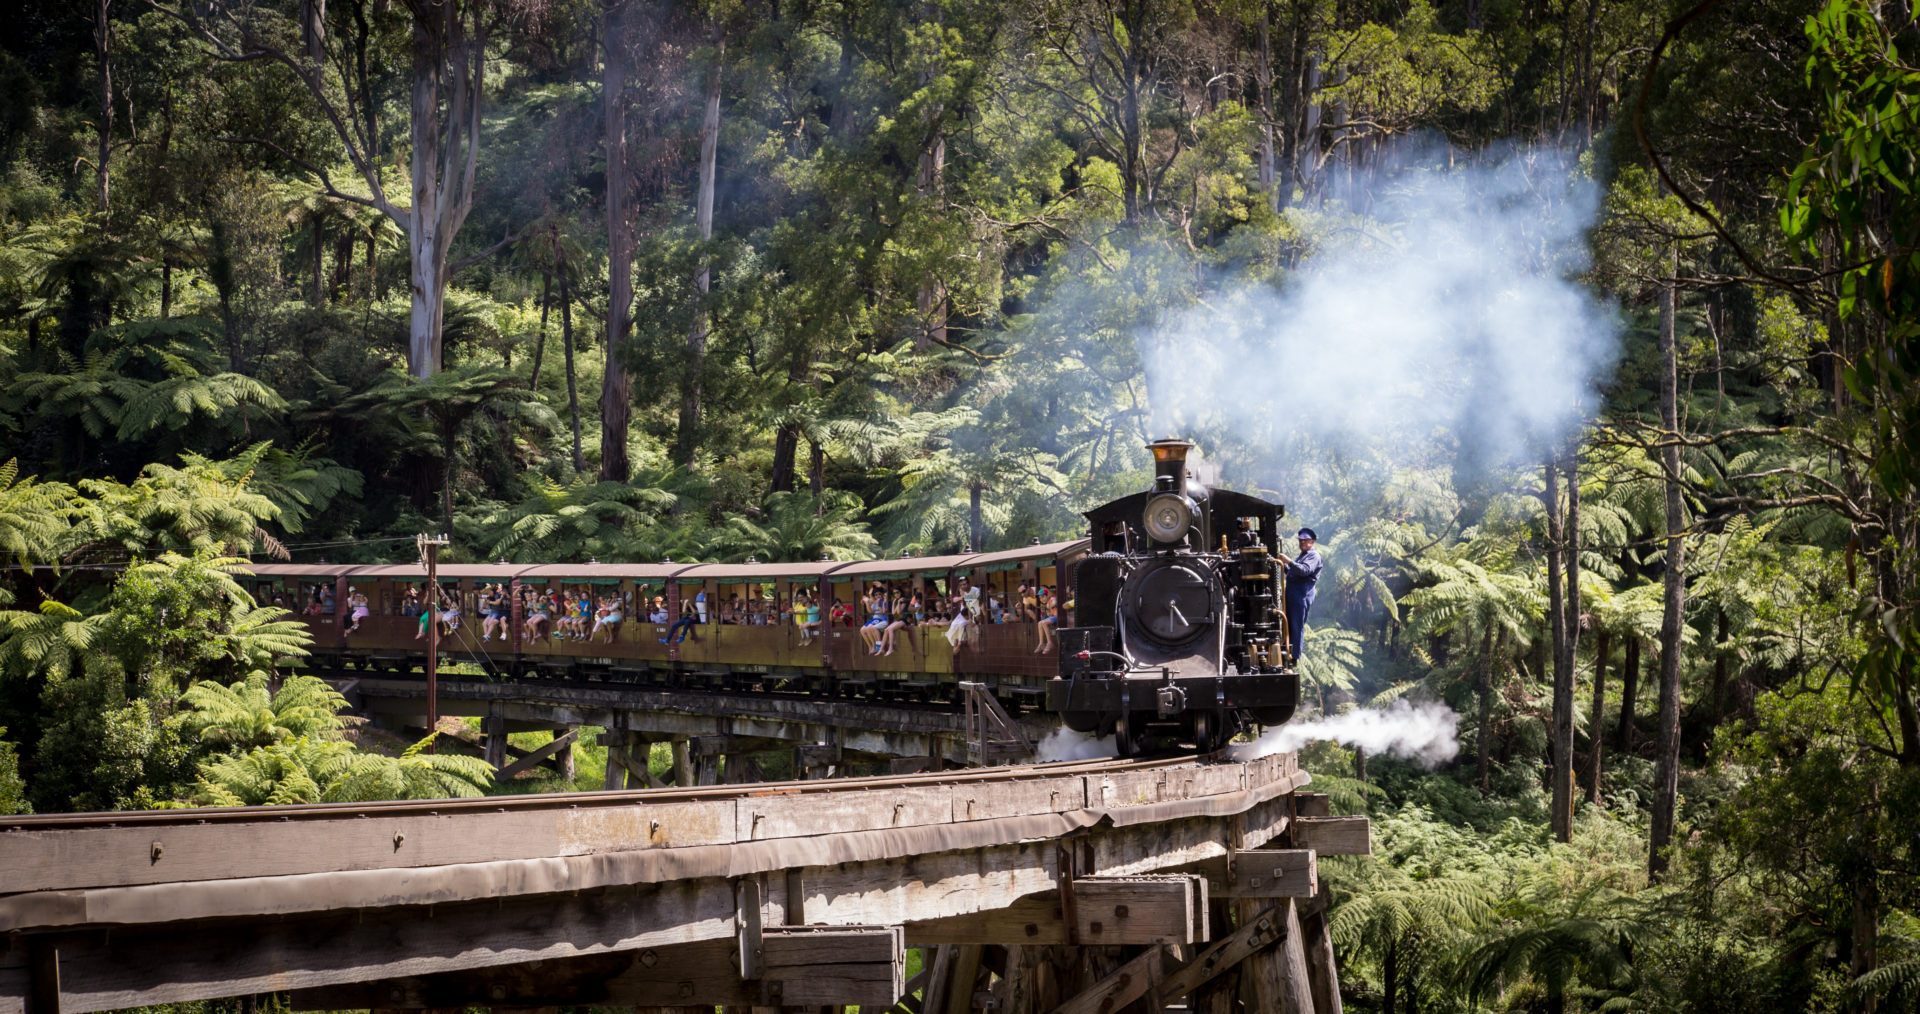 Puffing Billy Carriage NMM - Puffing Billy